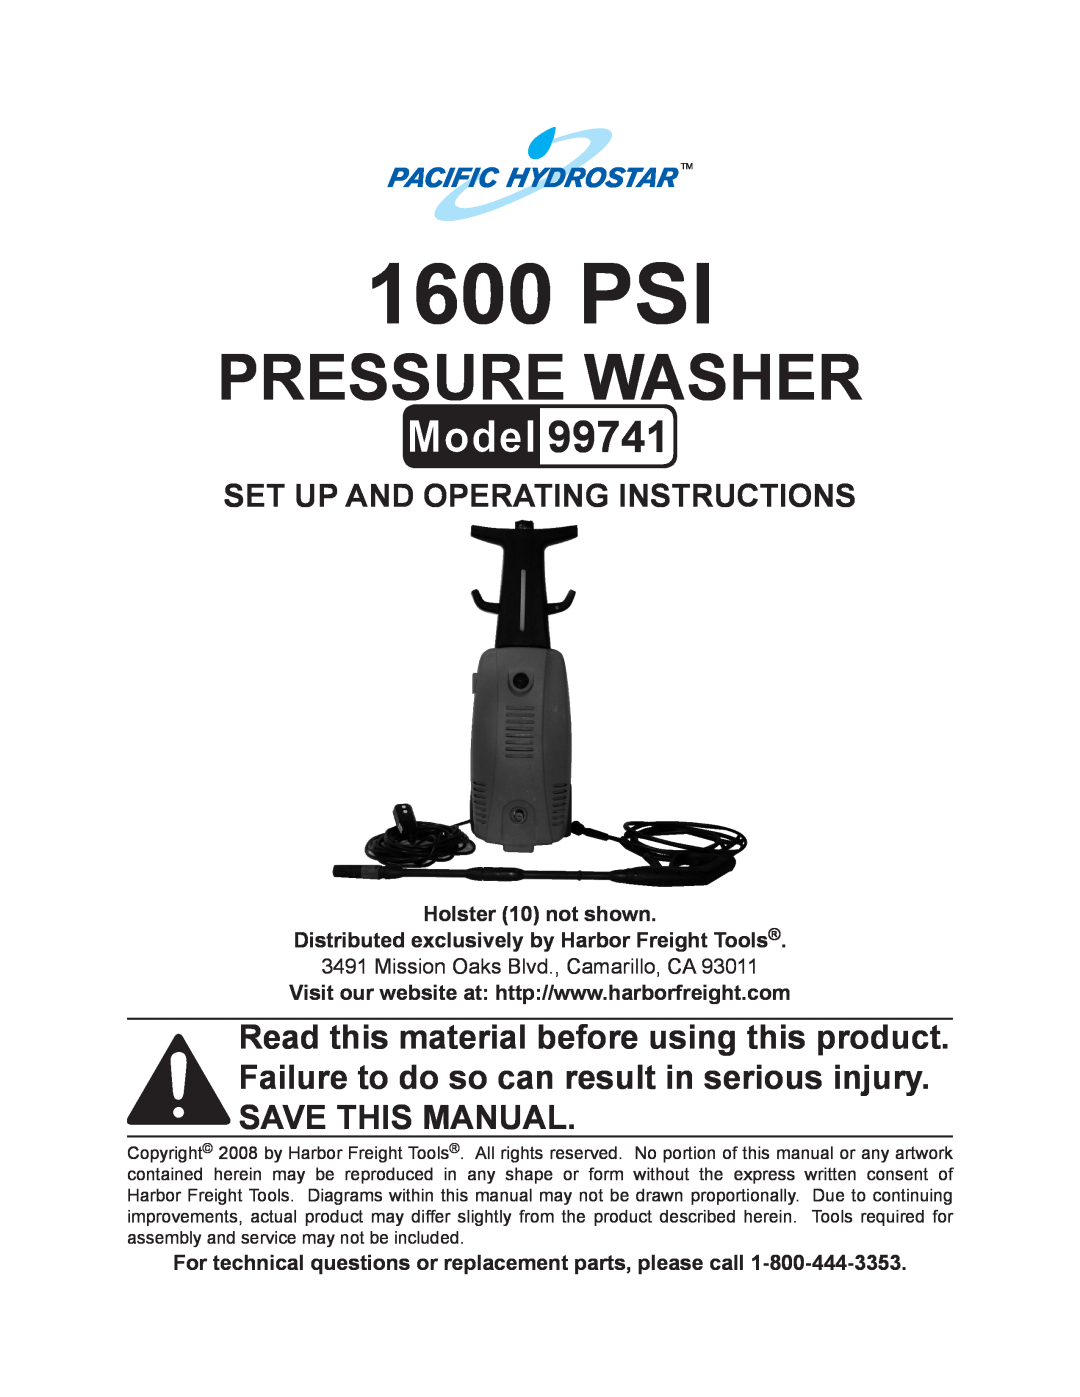 Harbor Freight Tools 99741 manual 1600 PSI, Pressure Washer, Set up and Operating Instructions 